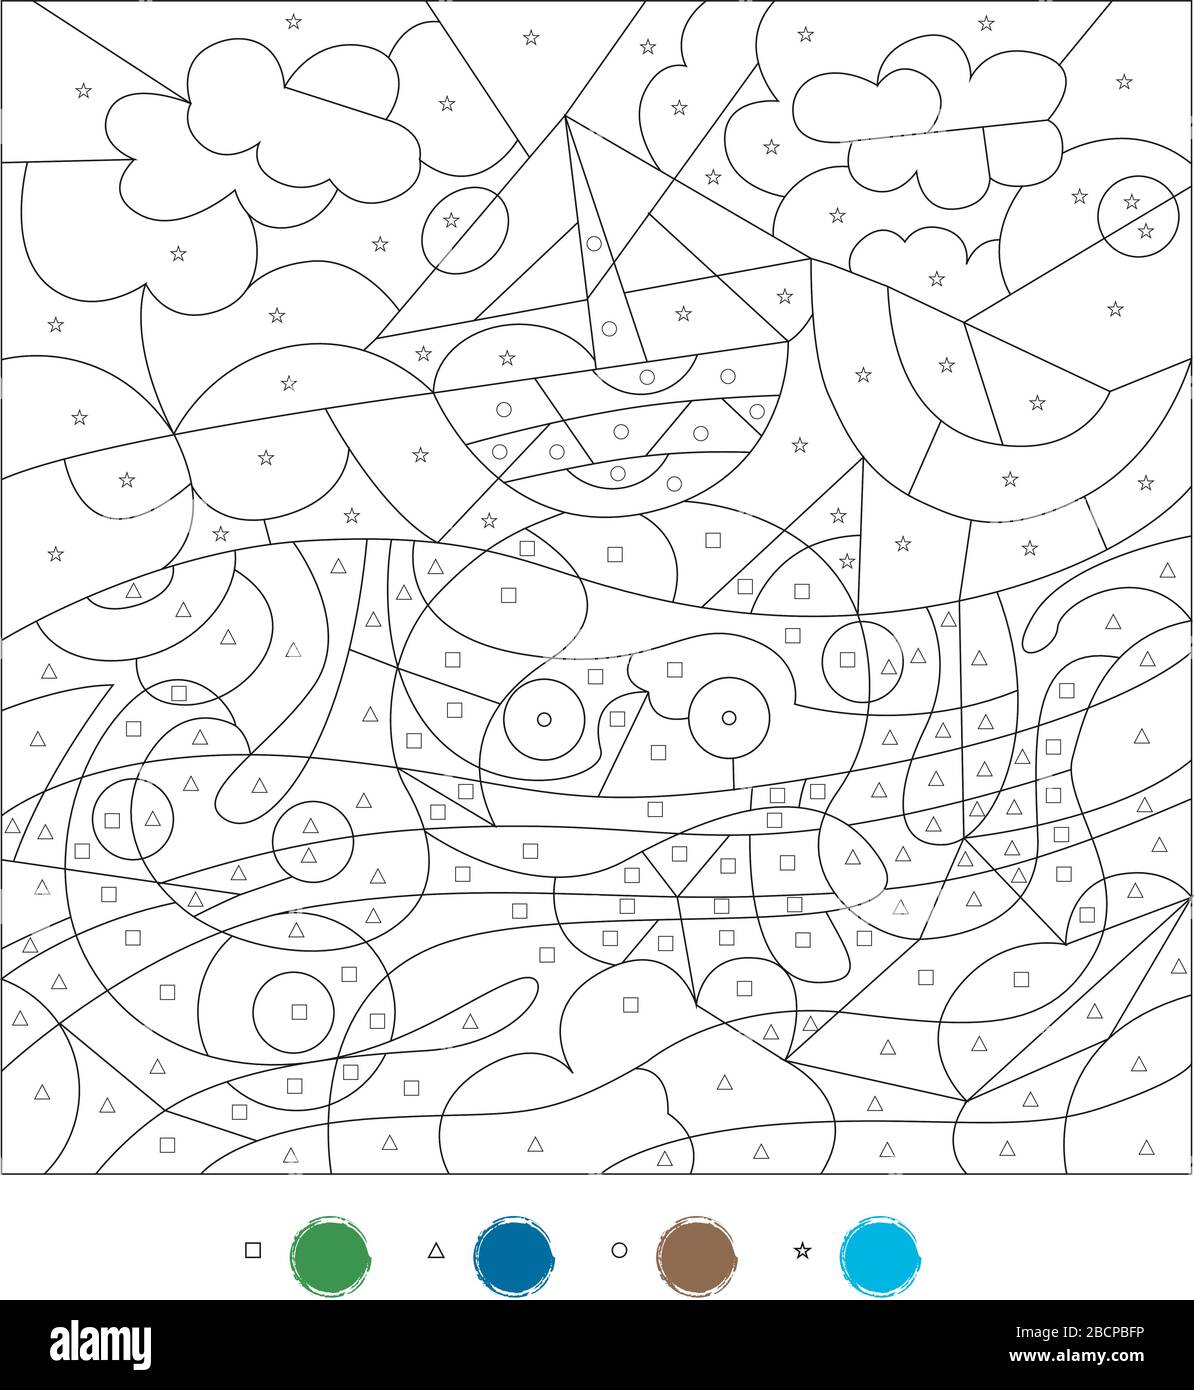 Coloring by symbols. Educational game for children. Octopus and ship. Stock Vector